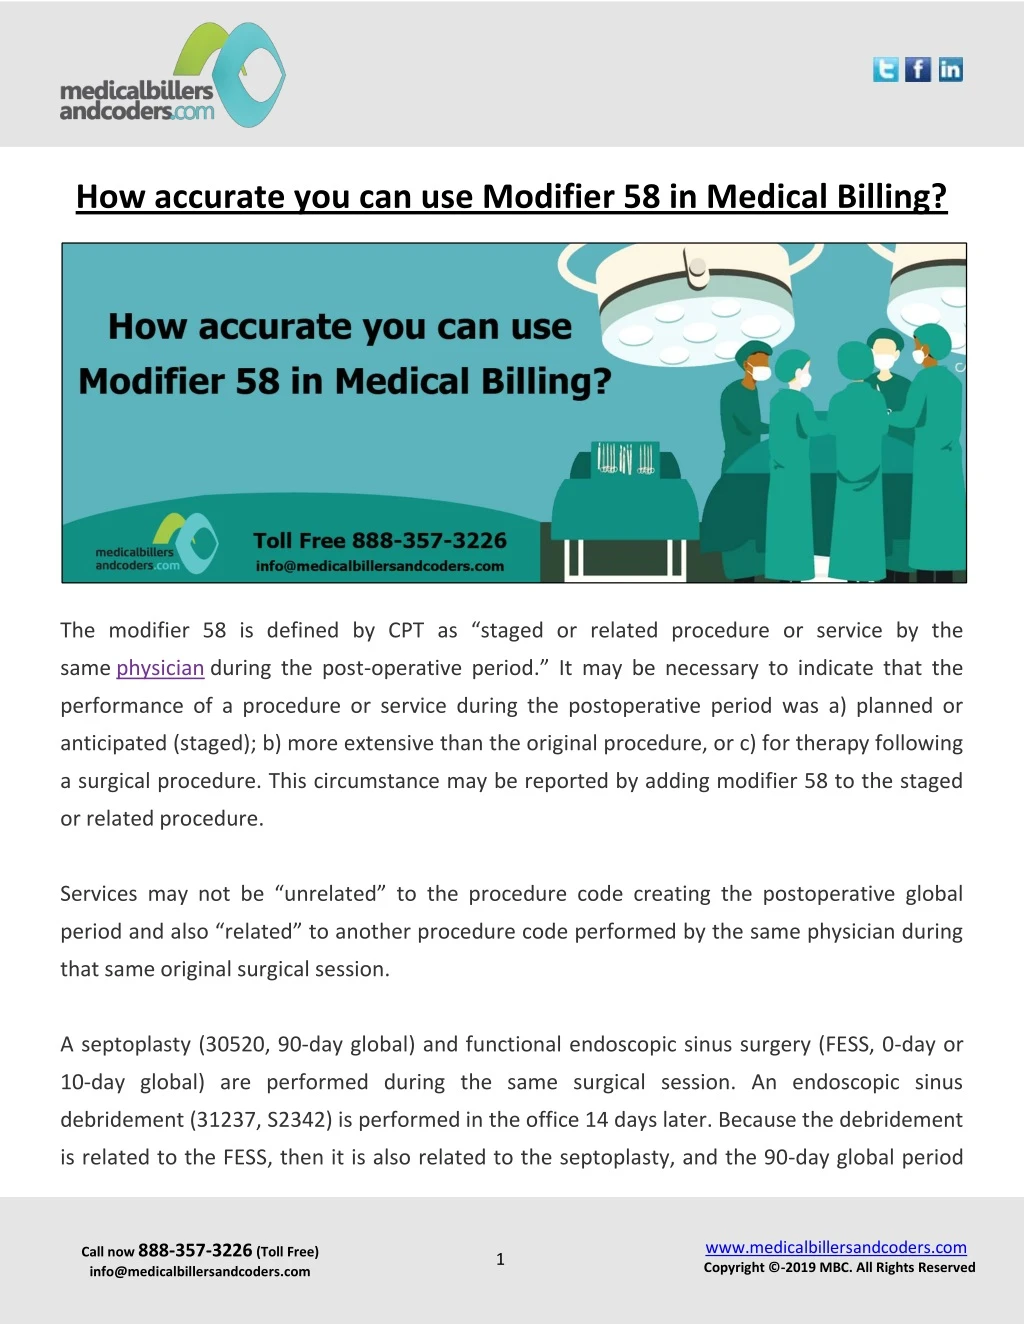 how accurate you can use modifier 58 in medical